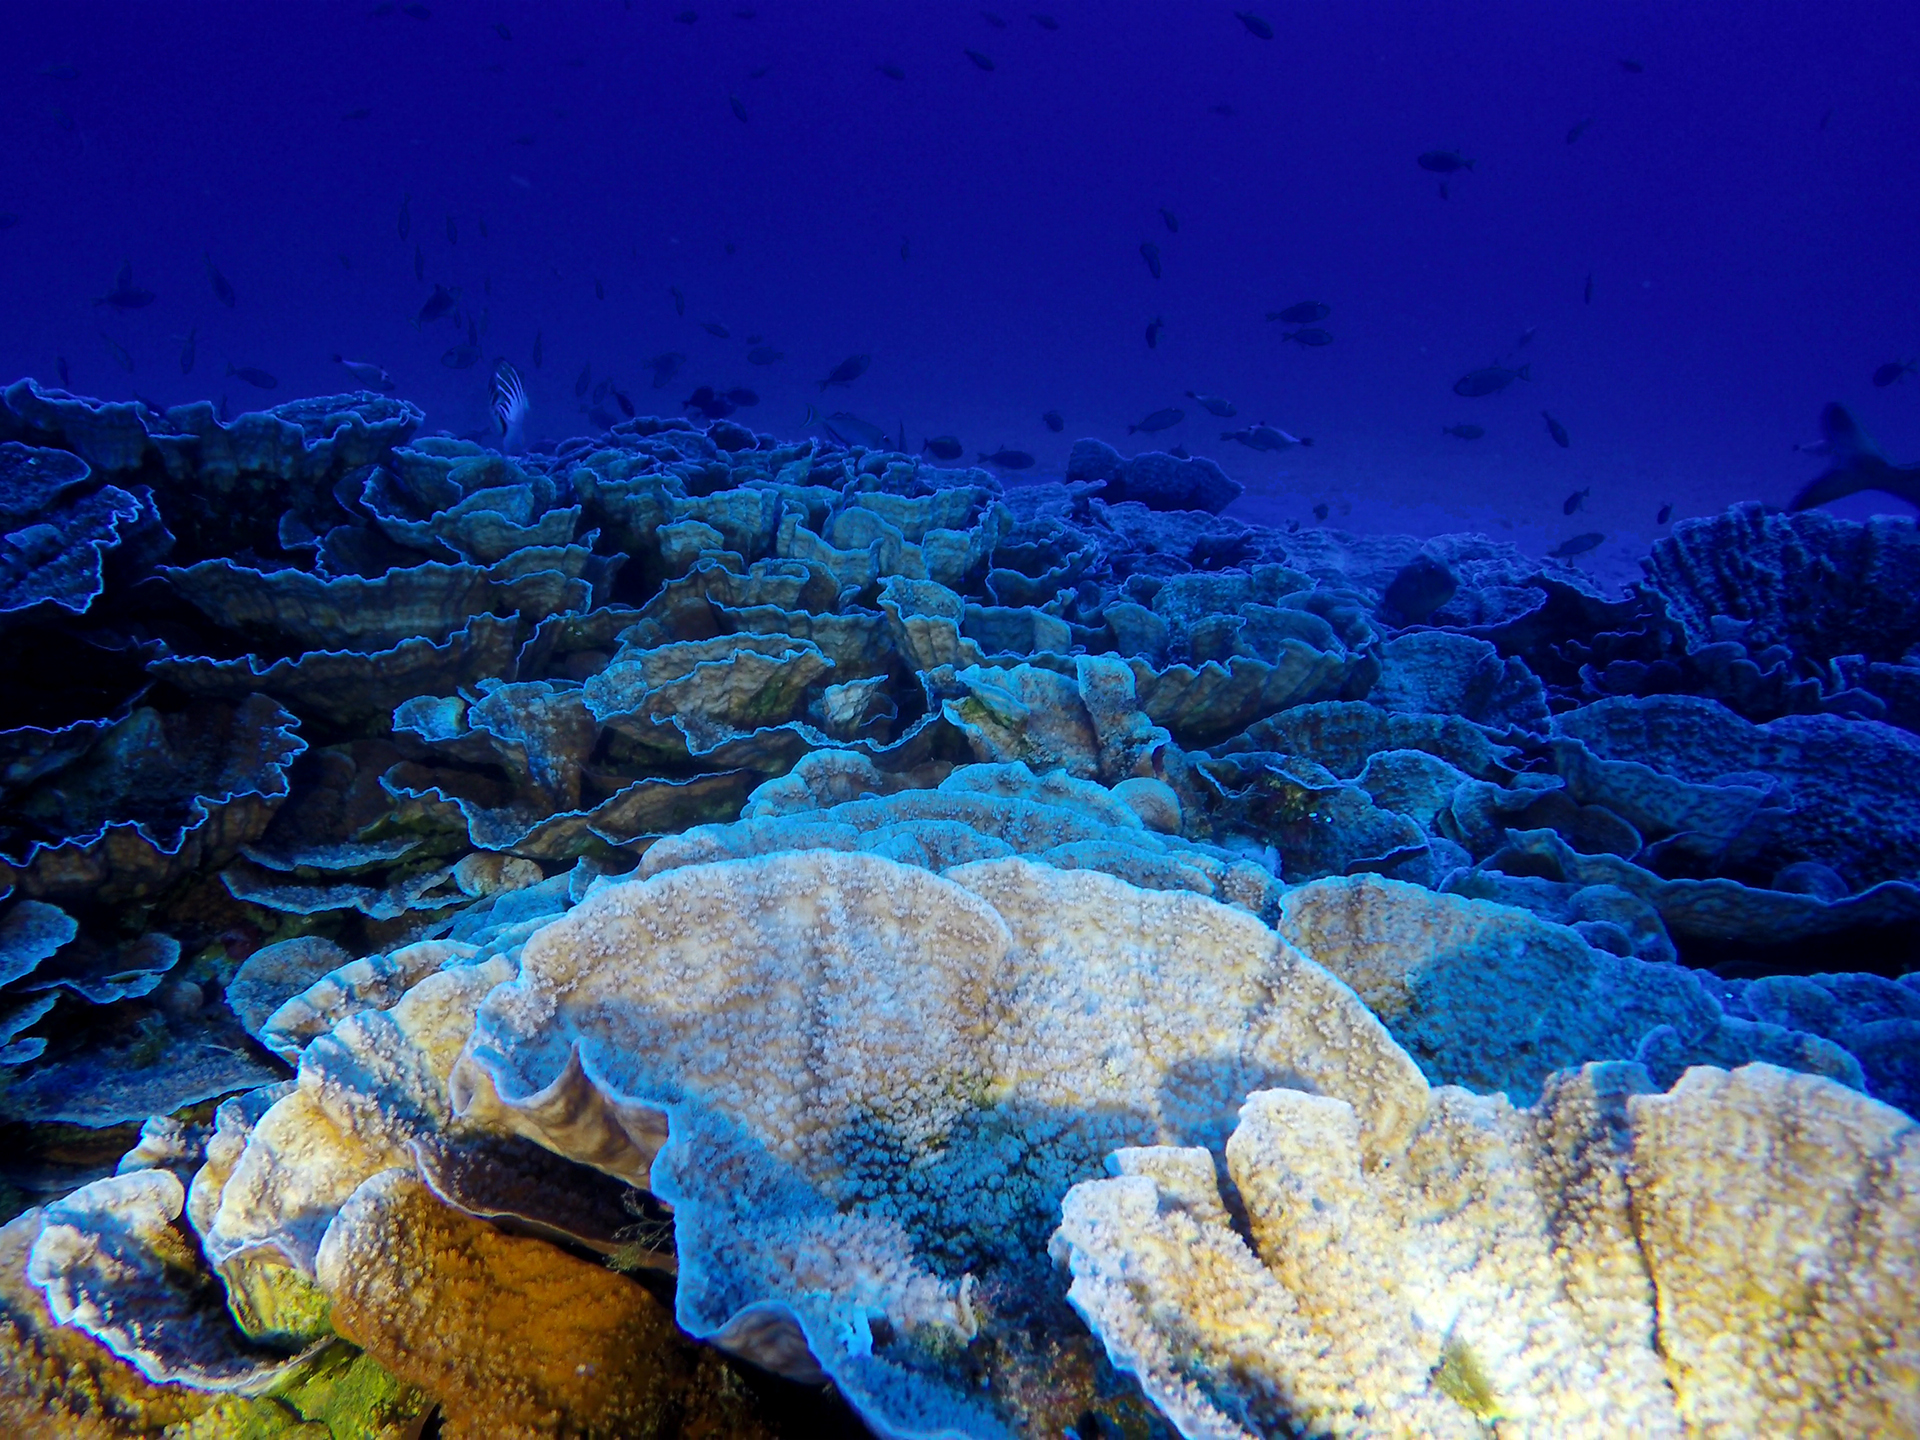 <p>The Anakena reef in the Marine Protected Area of Rapa Nui seventy to eighty meters below the sea surface. (Image © Matthias Gorny/ Oceana &amp; ESMOI)</p>